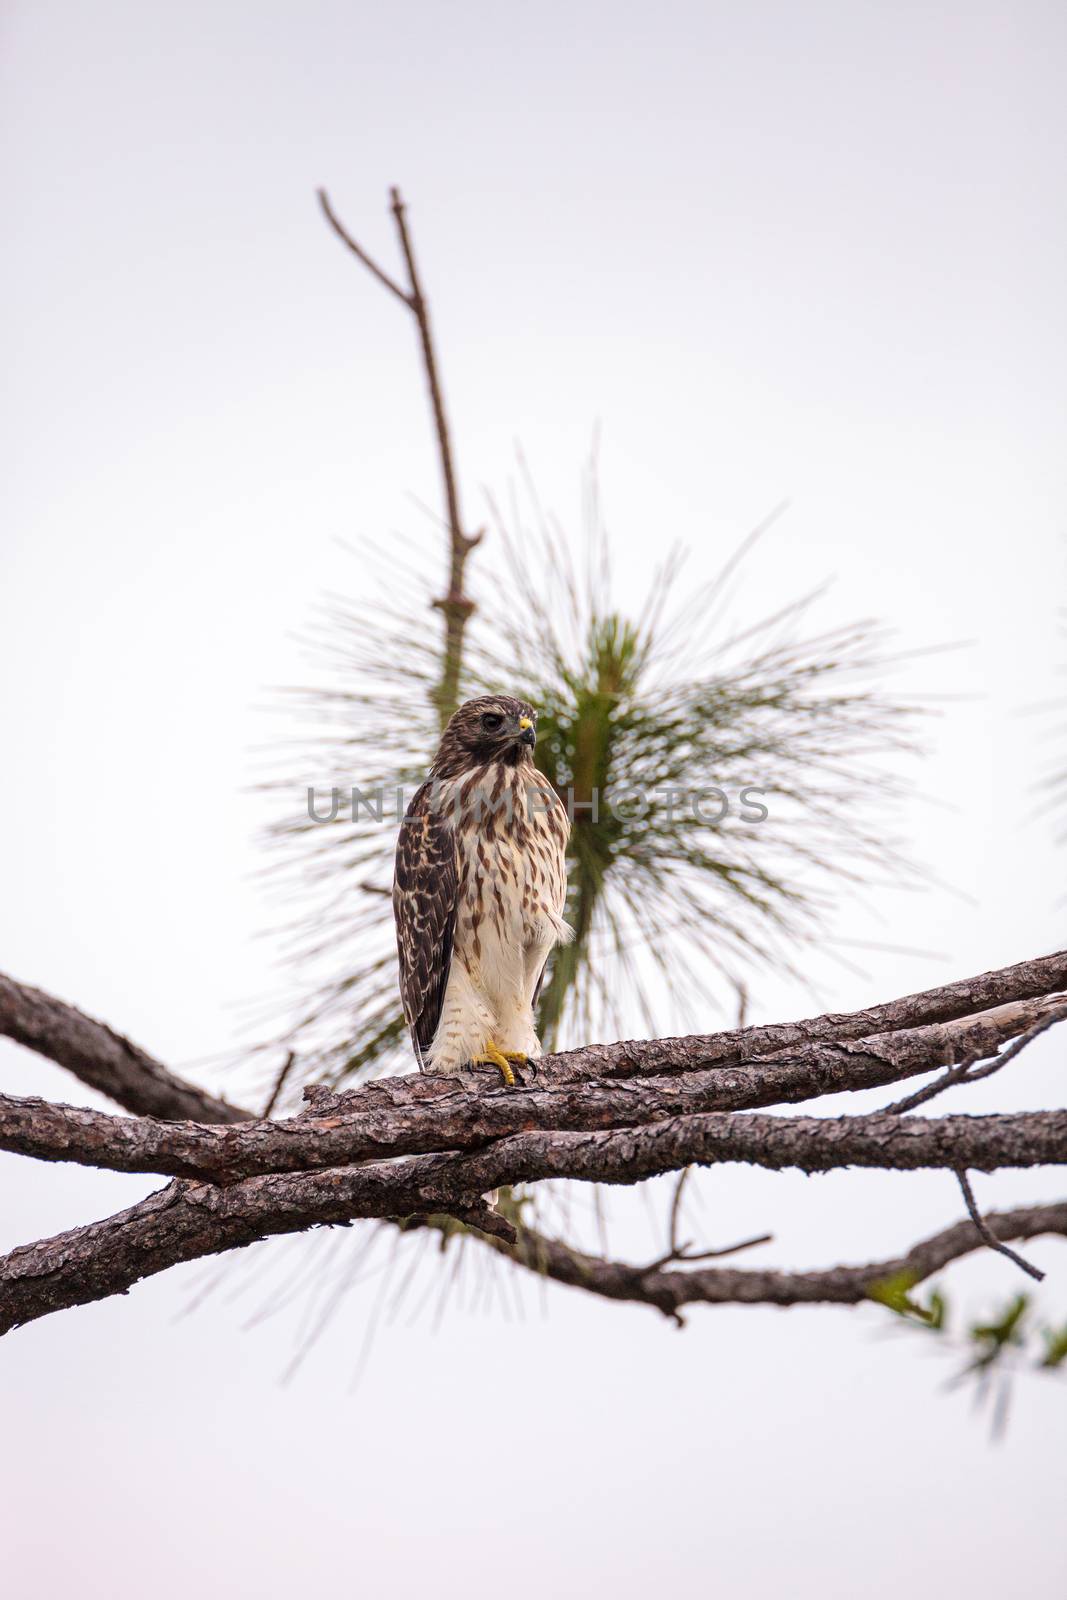 Red shouldered Hawk Buteo lineatus hunts for prey in the Corkscrew Swamp Sanctuary of Naples, Florida